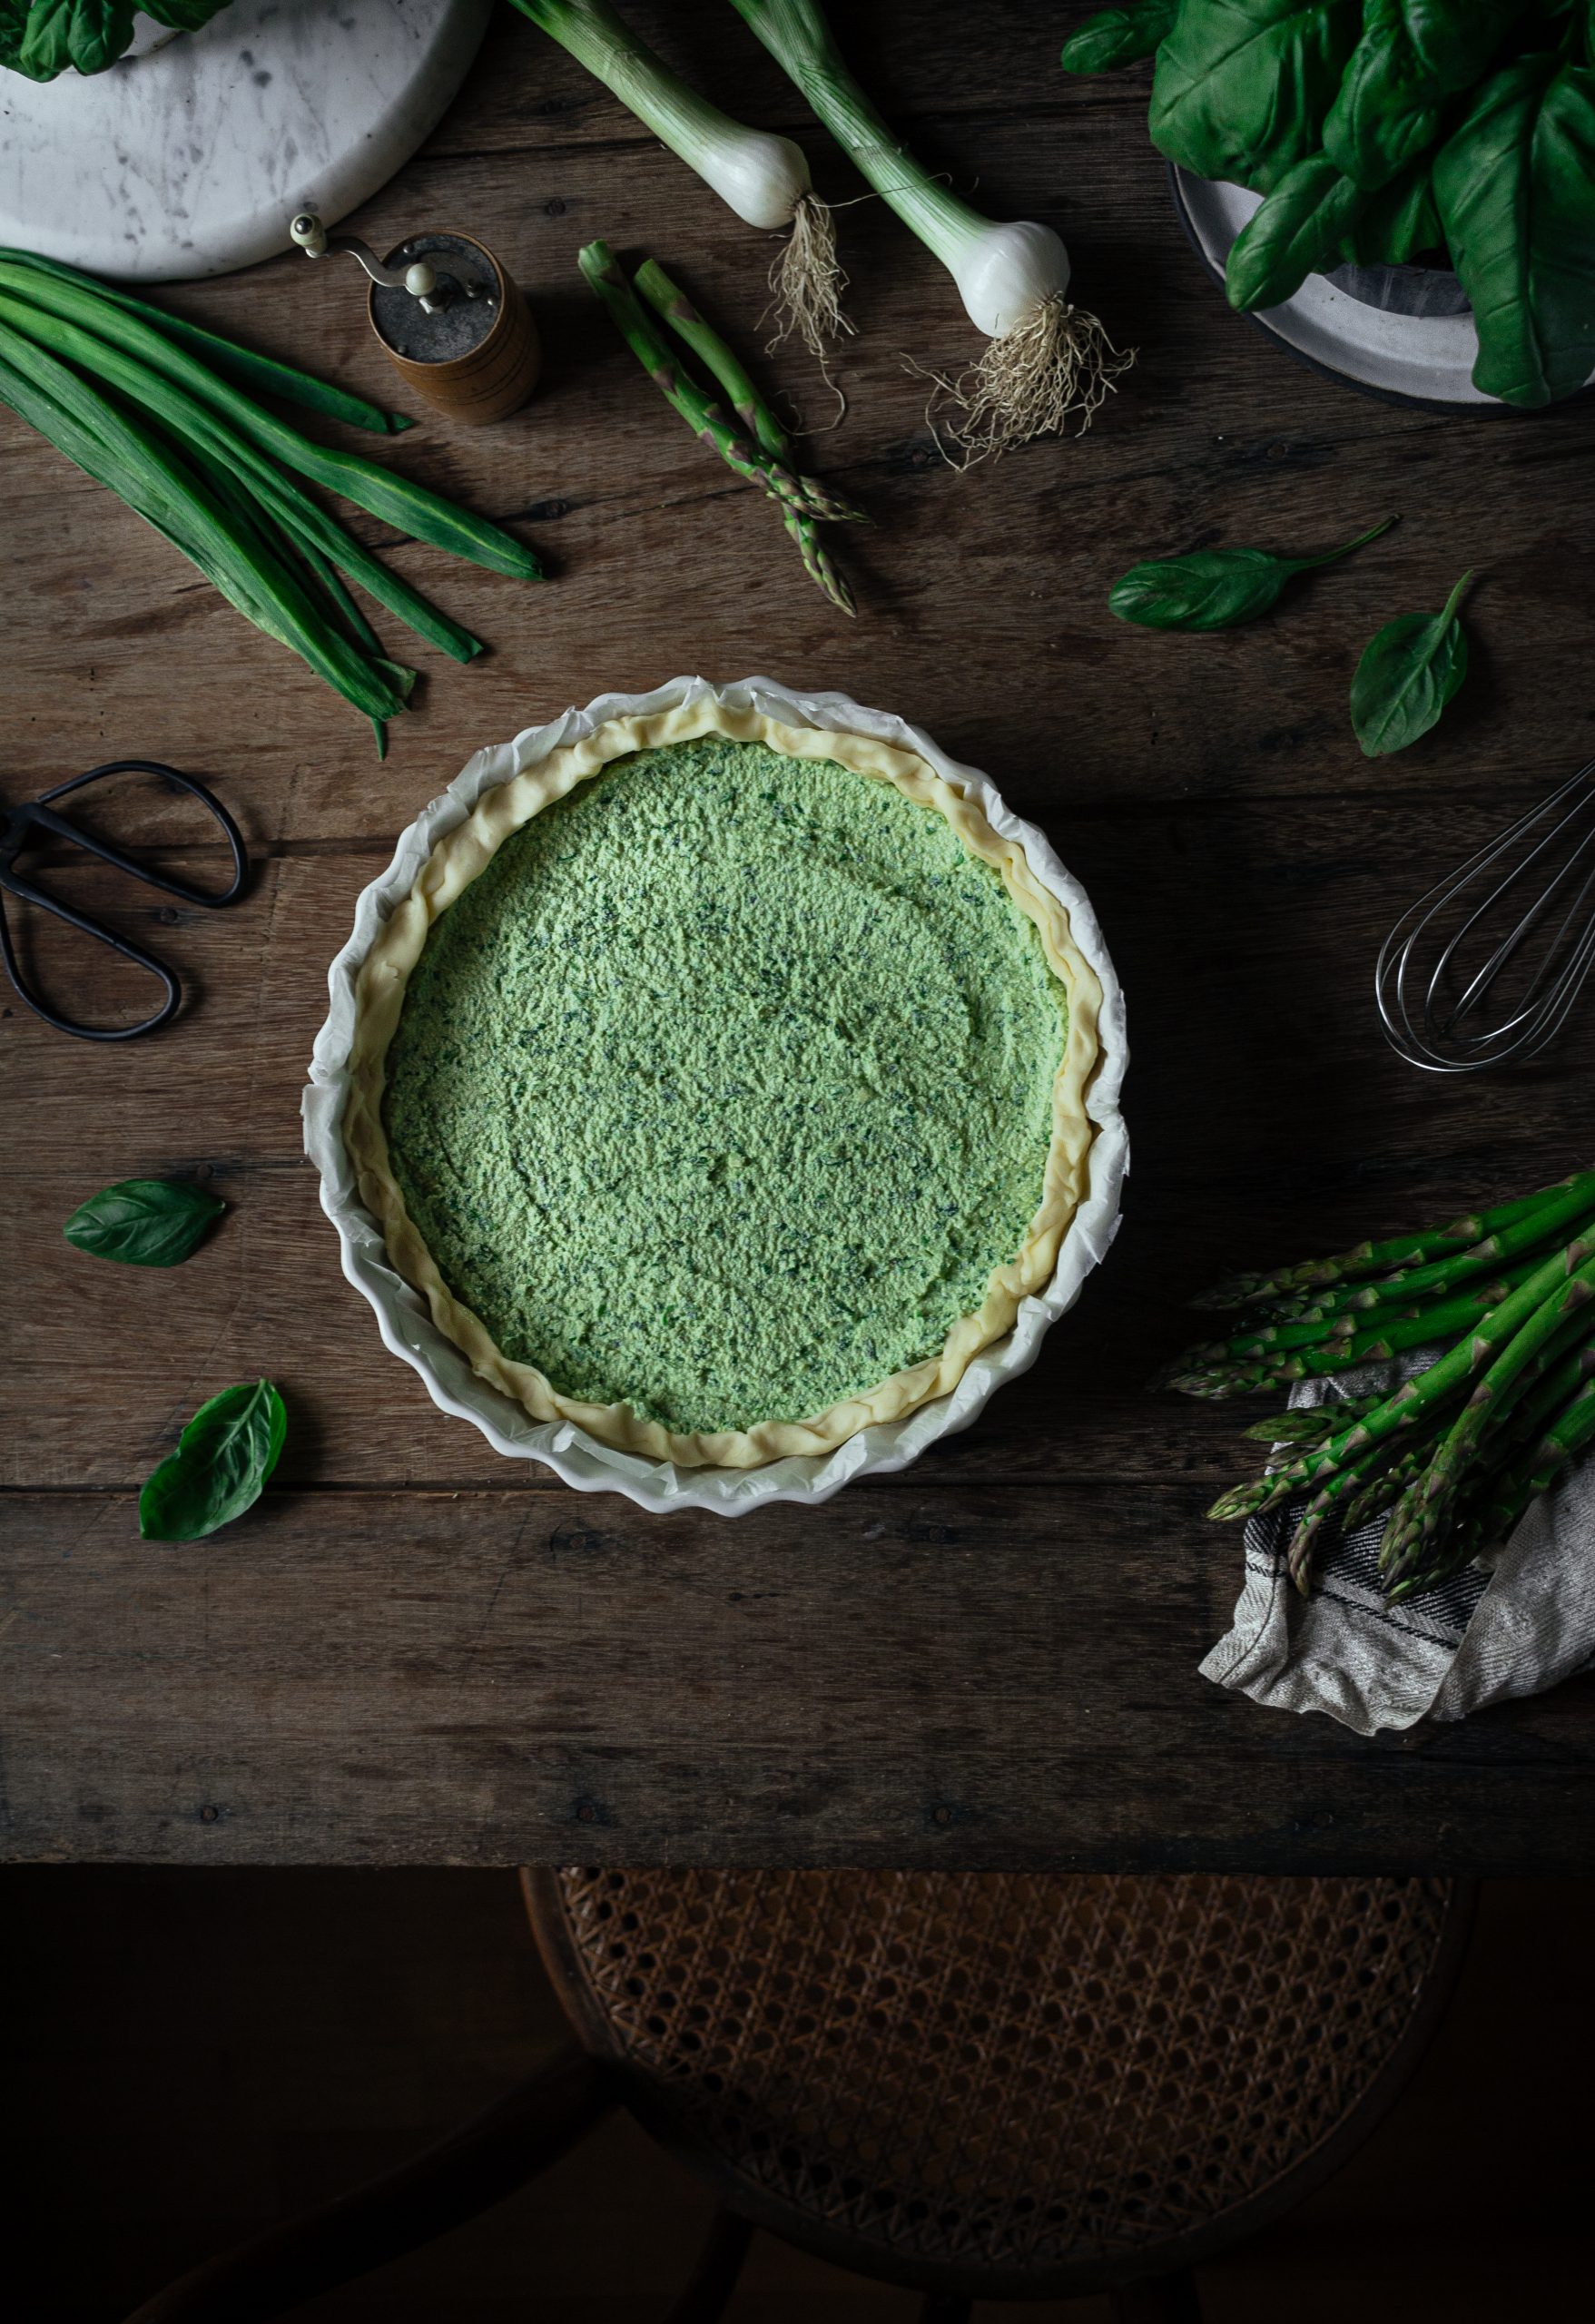 SIMPLE ASPARAGUS TART WITH PUFF PASTRY (VEGAN)